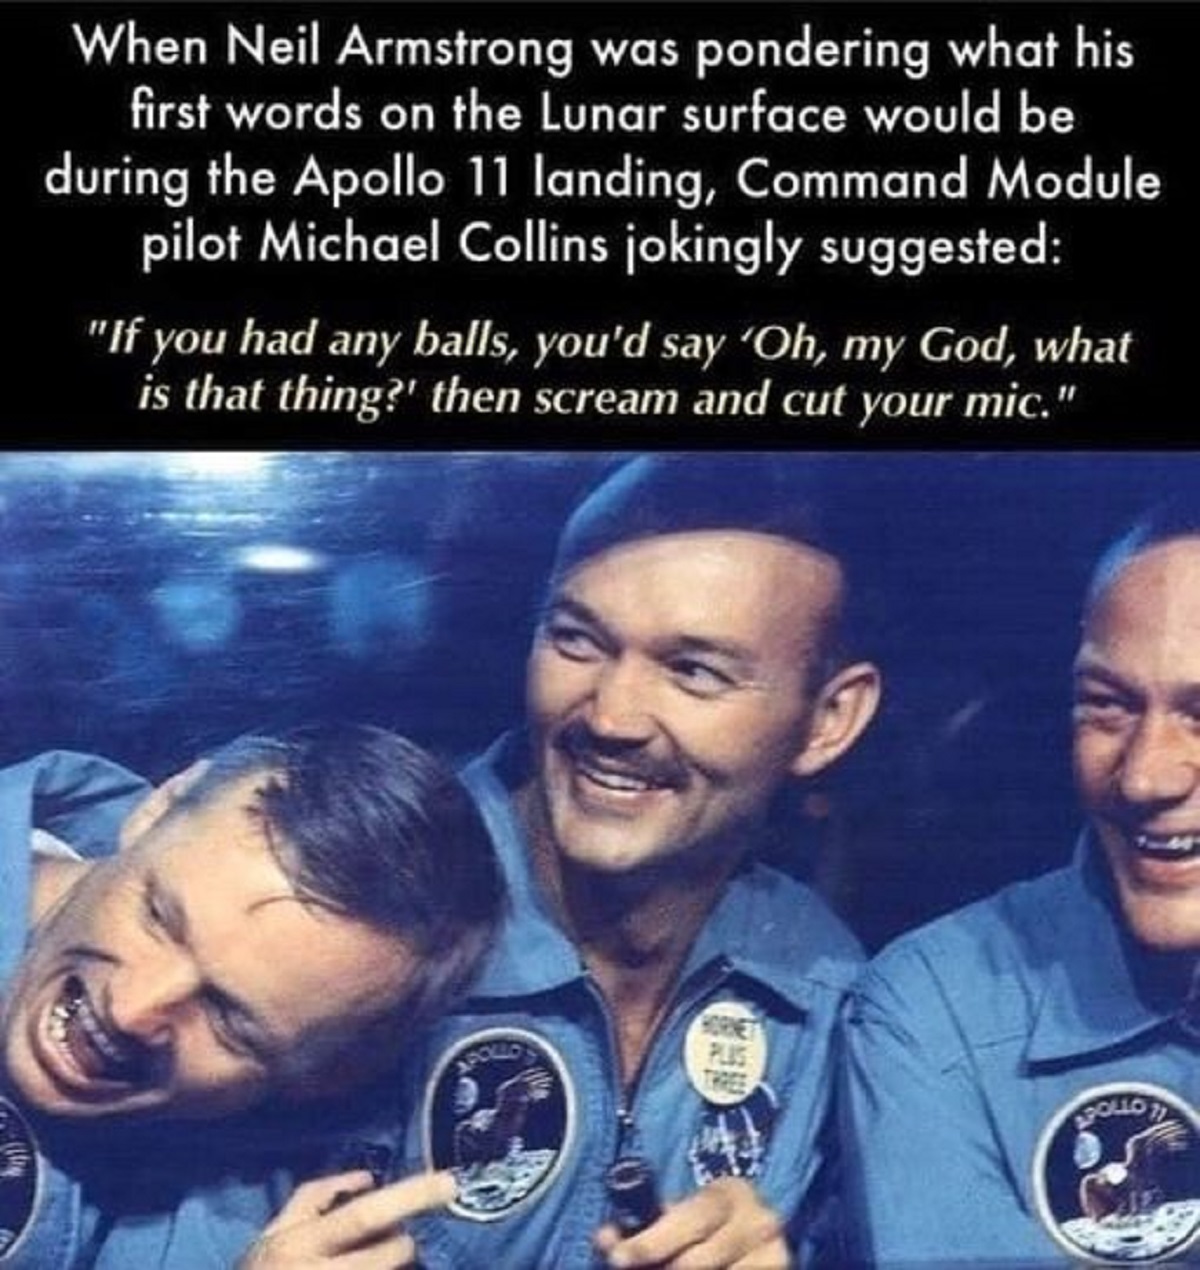 neil armstrong first words on the moon - When Neil Armstrong was pondering what his first words on the Lunar surface would be during the Apollo 11 landing, Command Module pilot Michael Collins jokingly suggested "If you had any balls, you'd say 'Oh, my Go